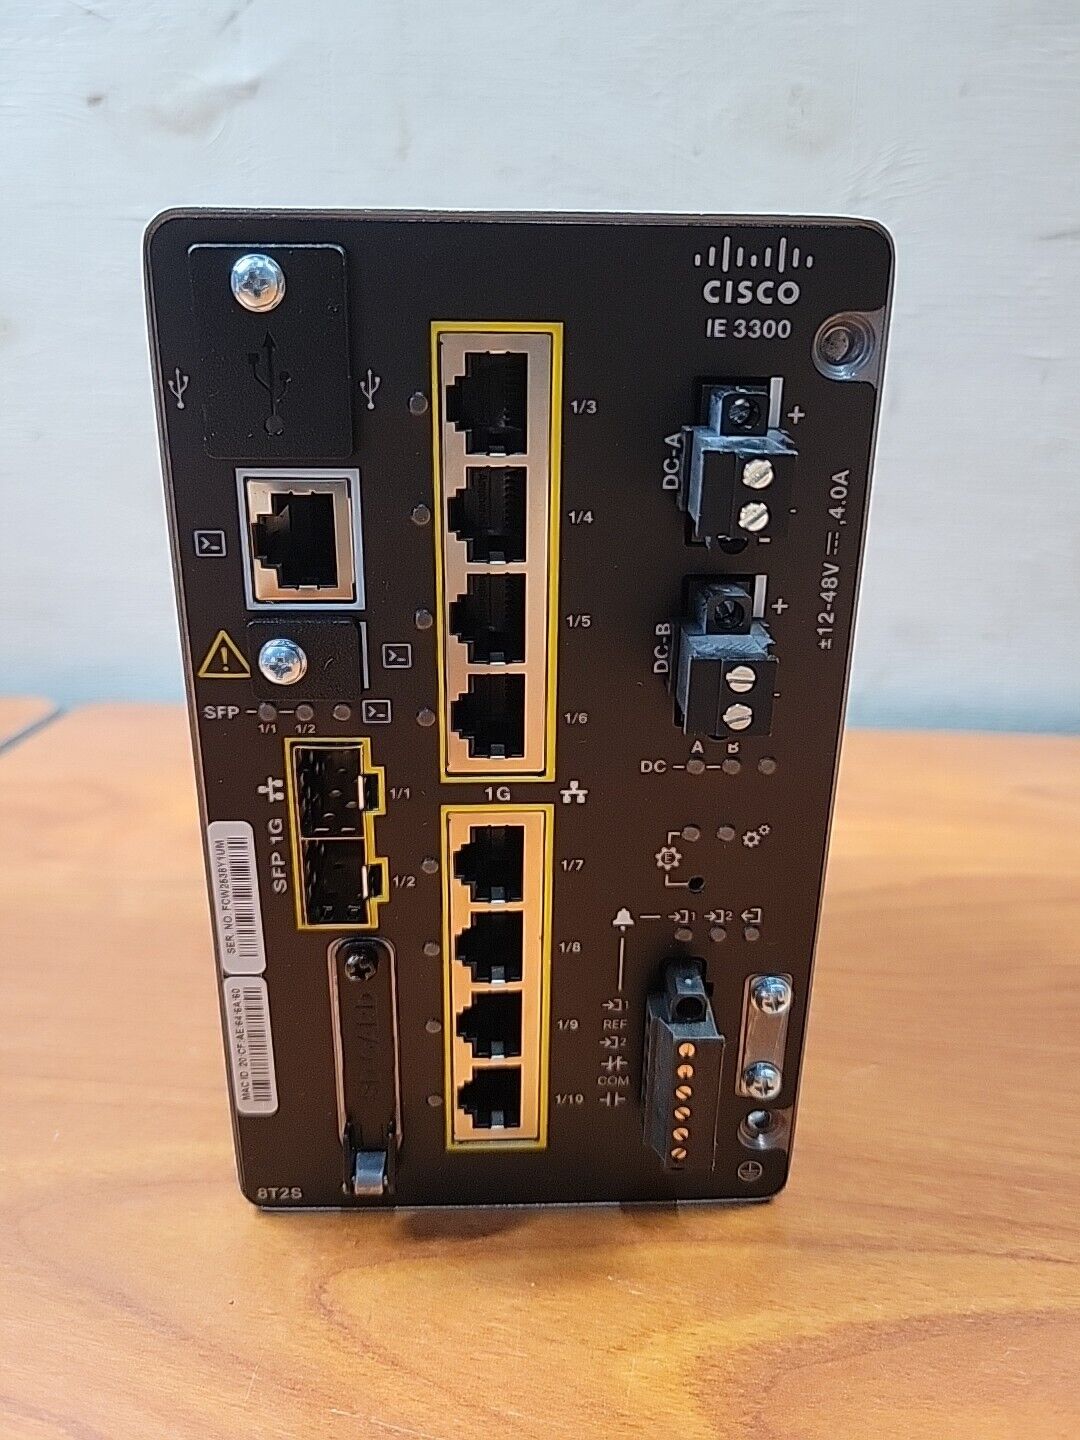 Cisco IE-3300-8T2S-E Cisco Catalyst IE3300 Rugged Series Switch